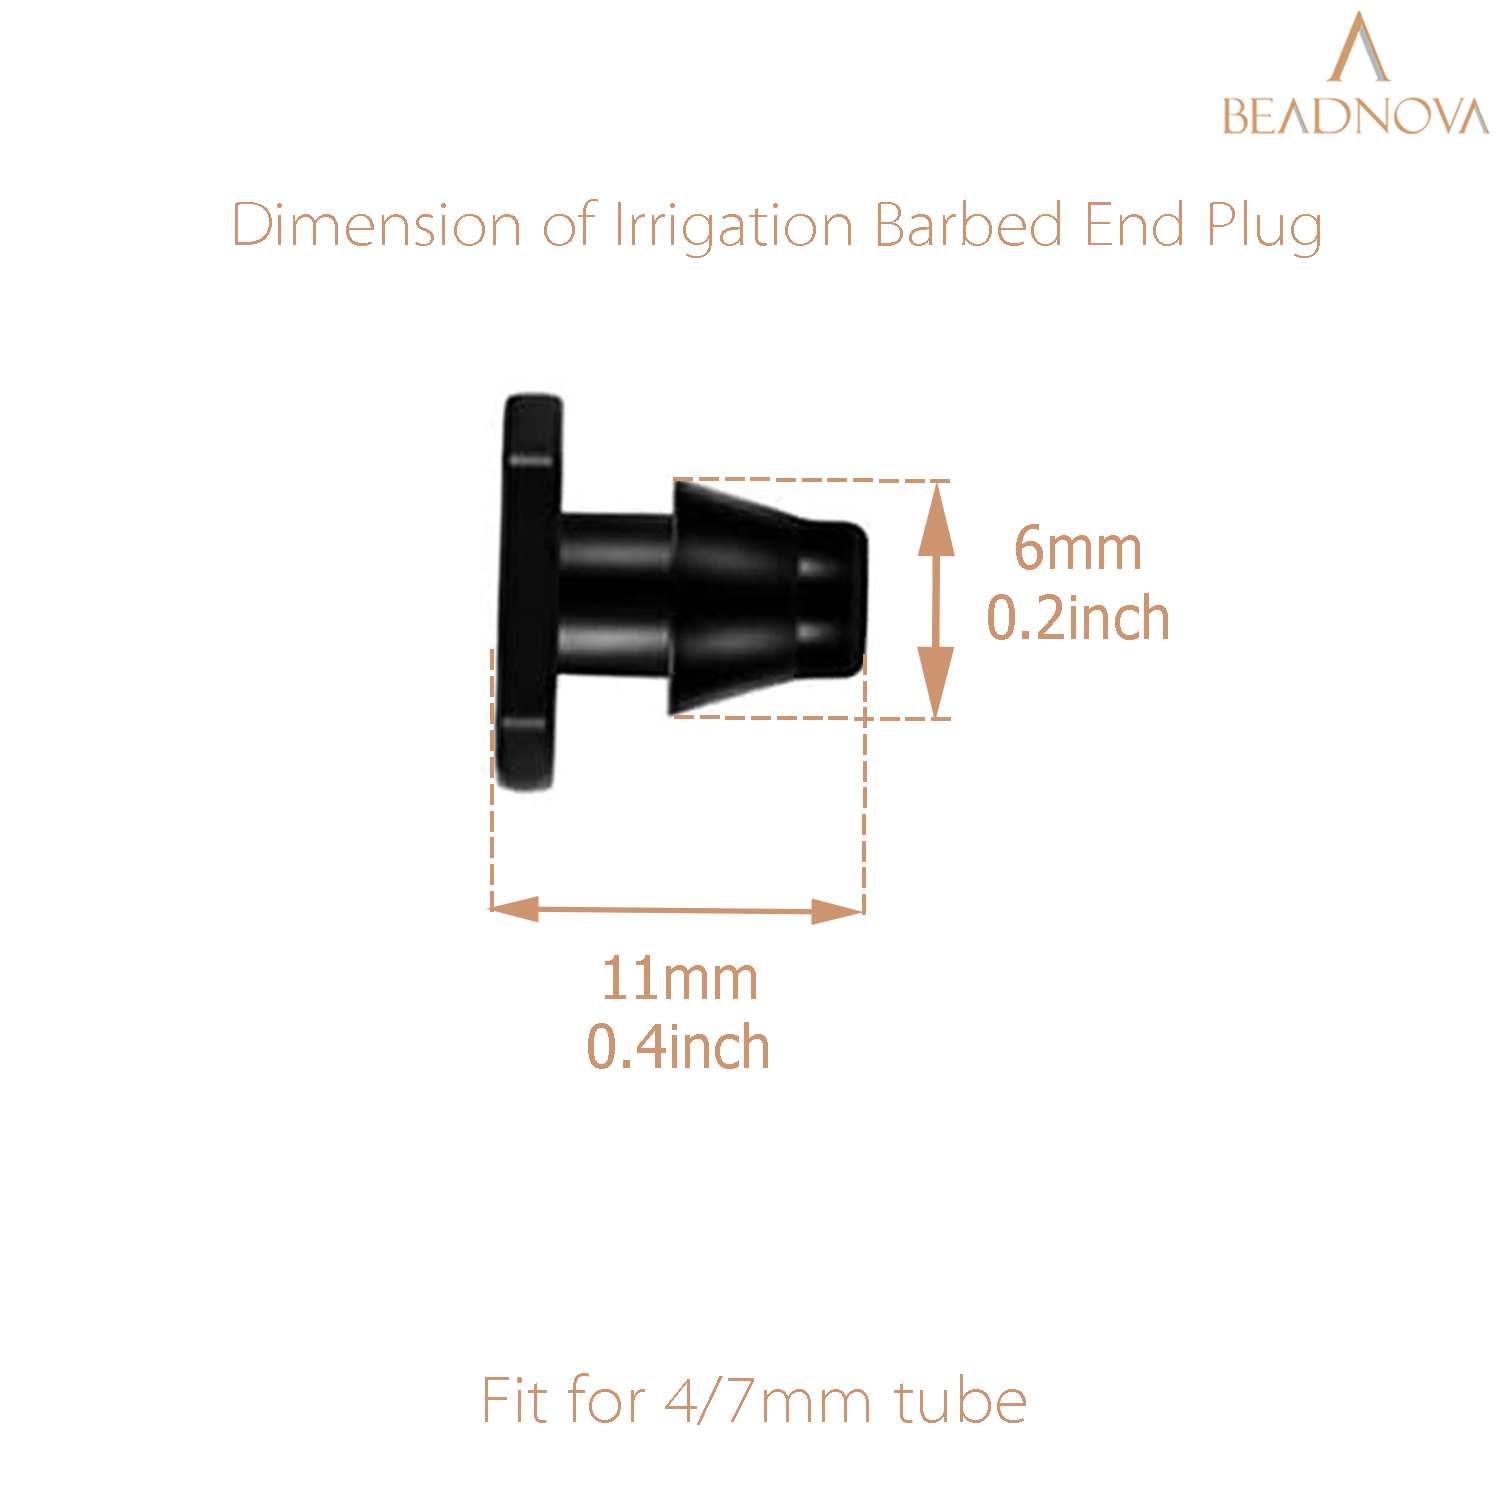 0.600 ID Drip Line End Closure for Drip and Sprinkler Systems 17mm iRunning 18 Pieces Drip Irrigation 1/2 Tubing End Plugs Fittings End Cap Connectors for 1/2 Inch Irrigation Tubing 